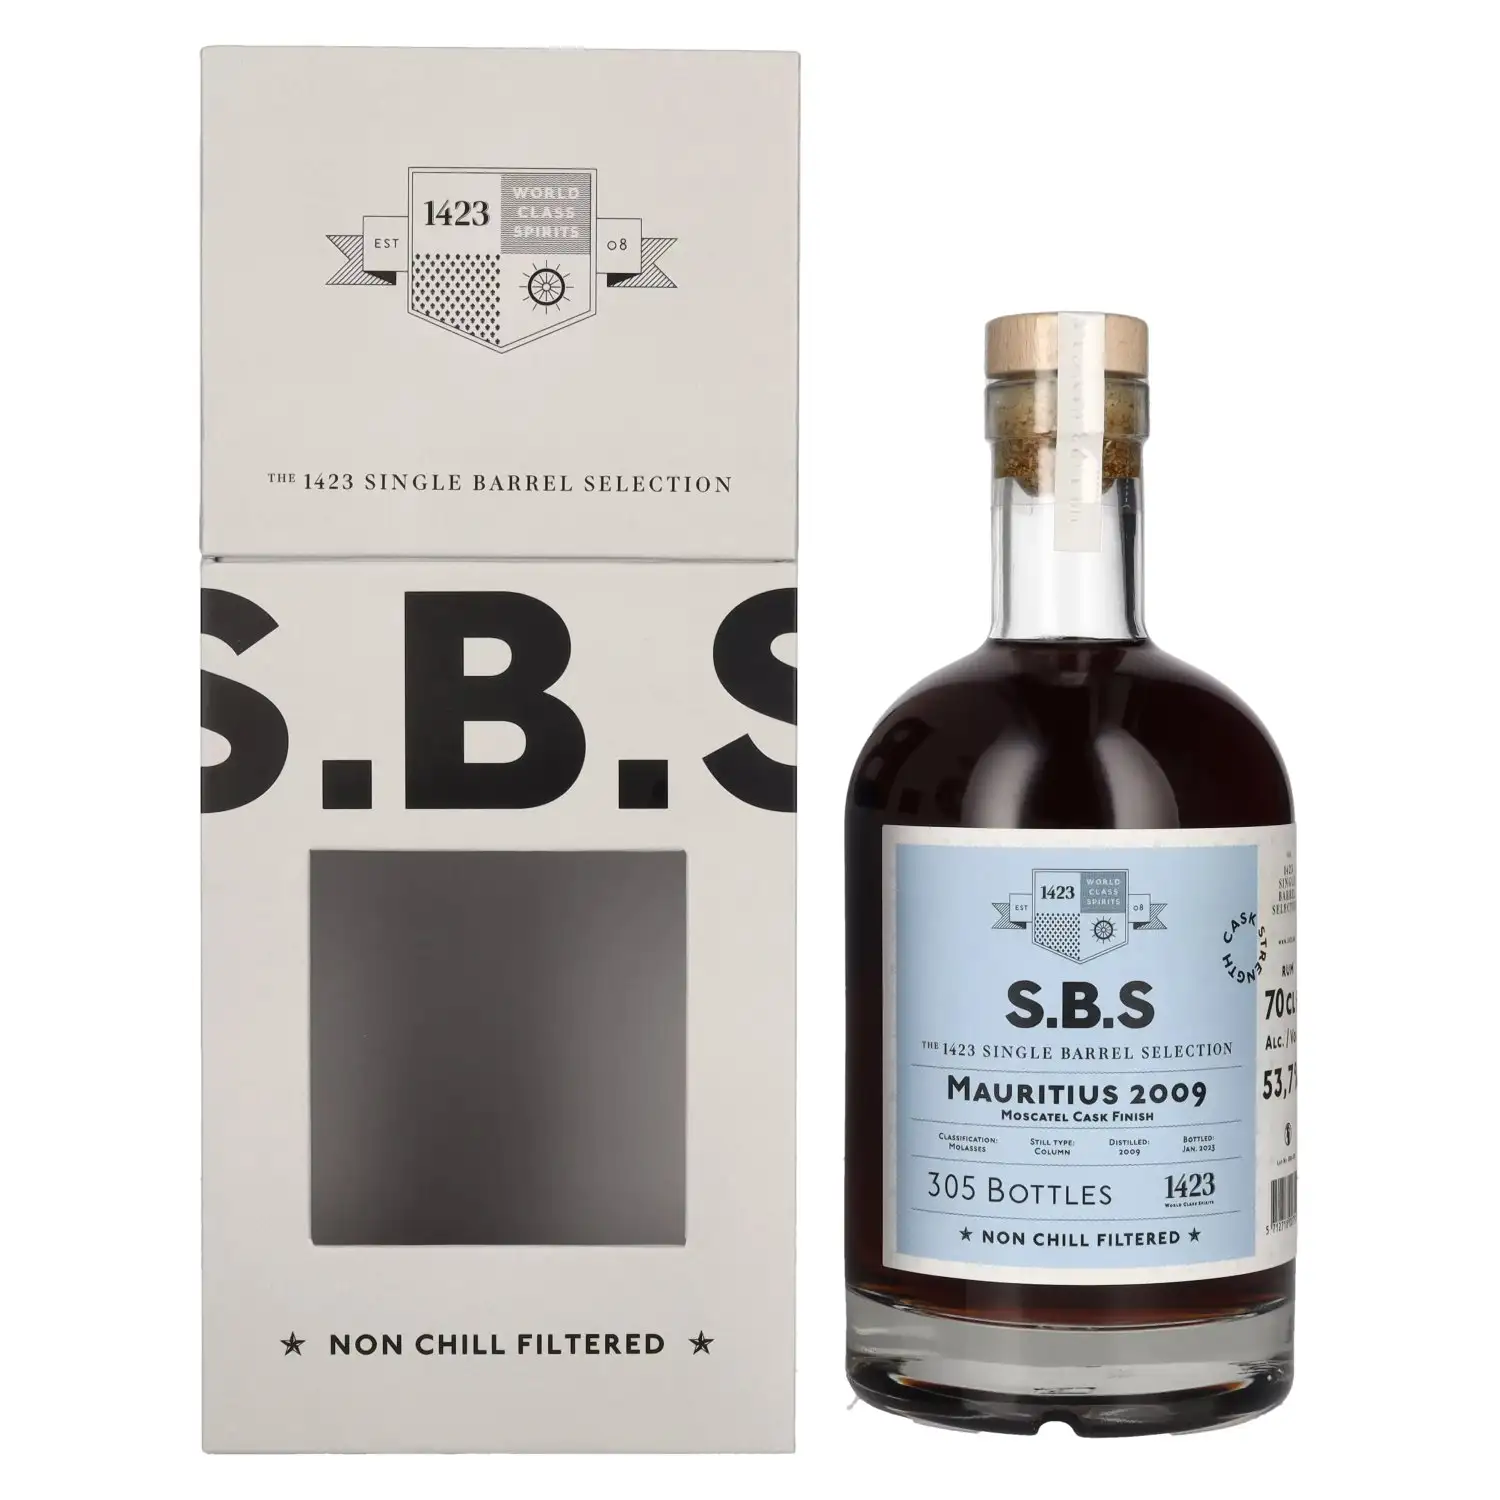 Image of the front of the bottle of the rum S.B.S Mauritius 2009